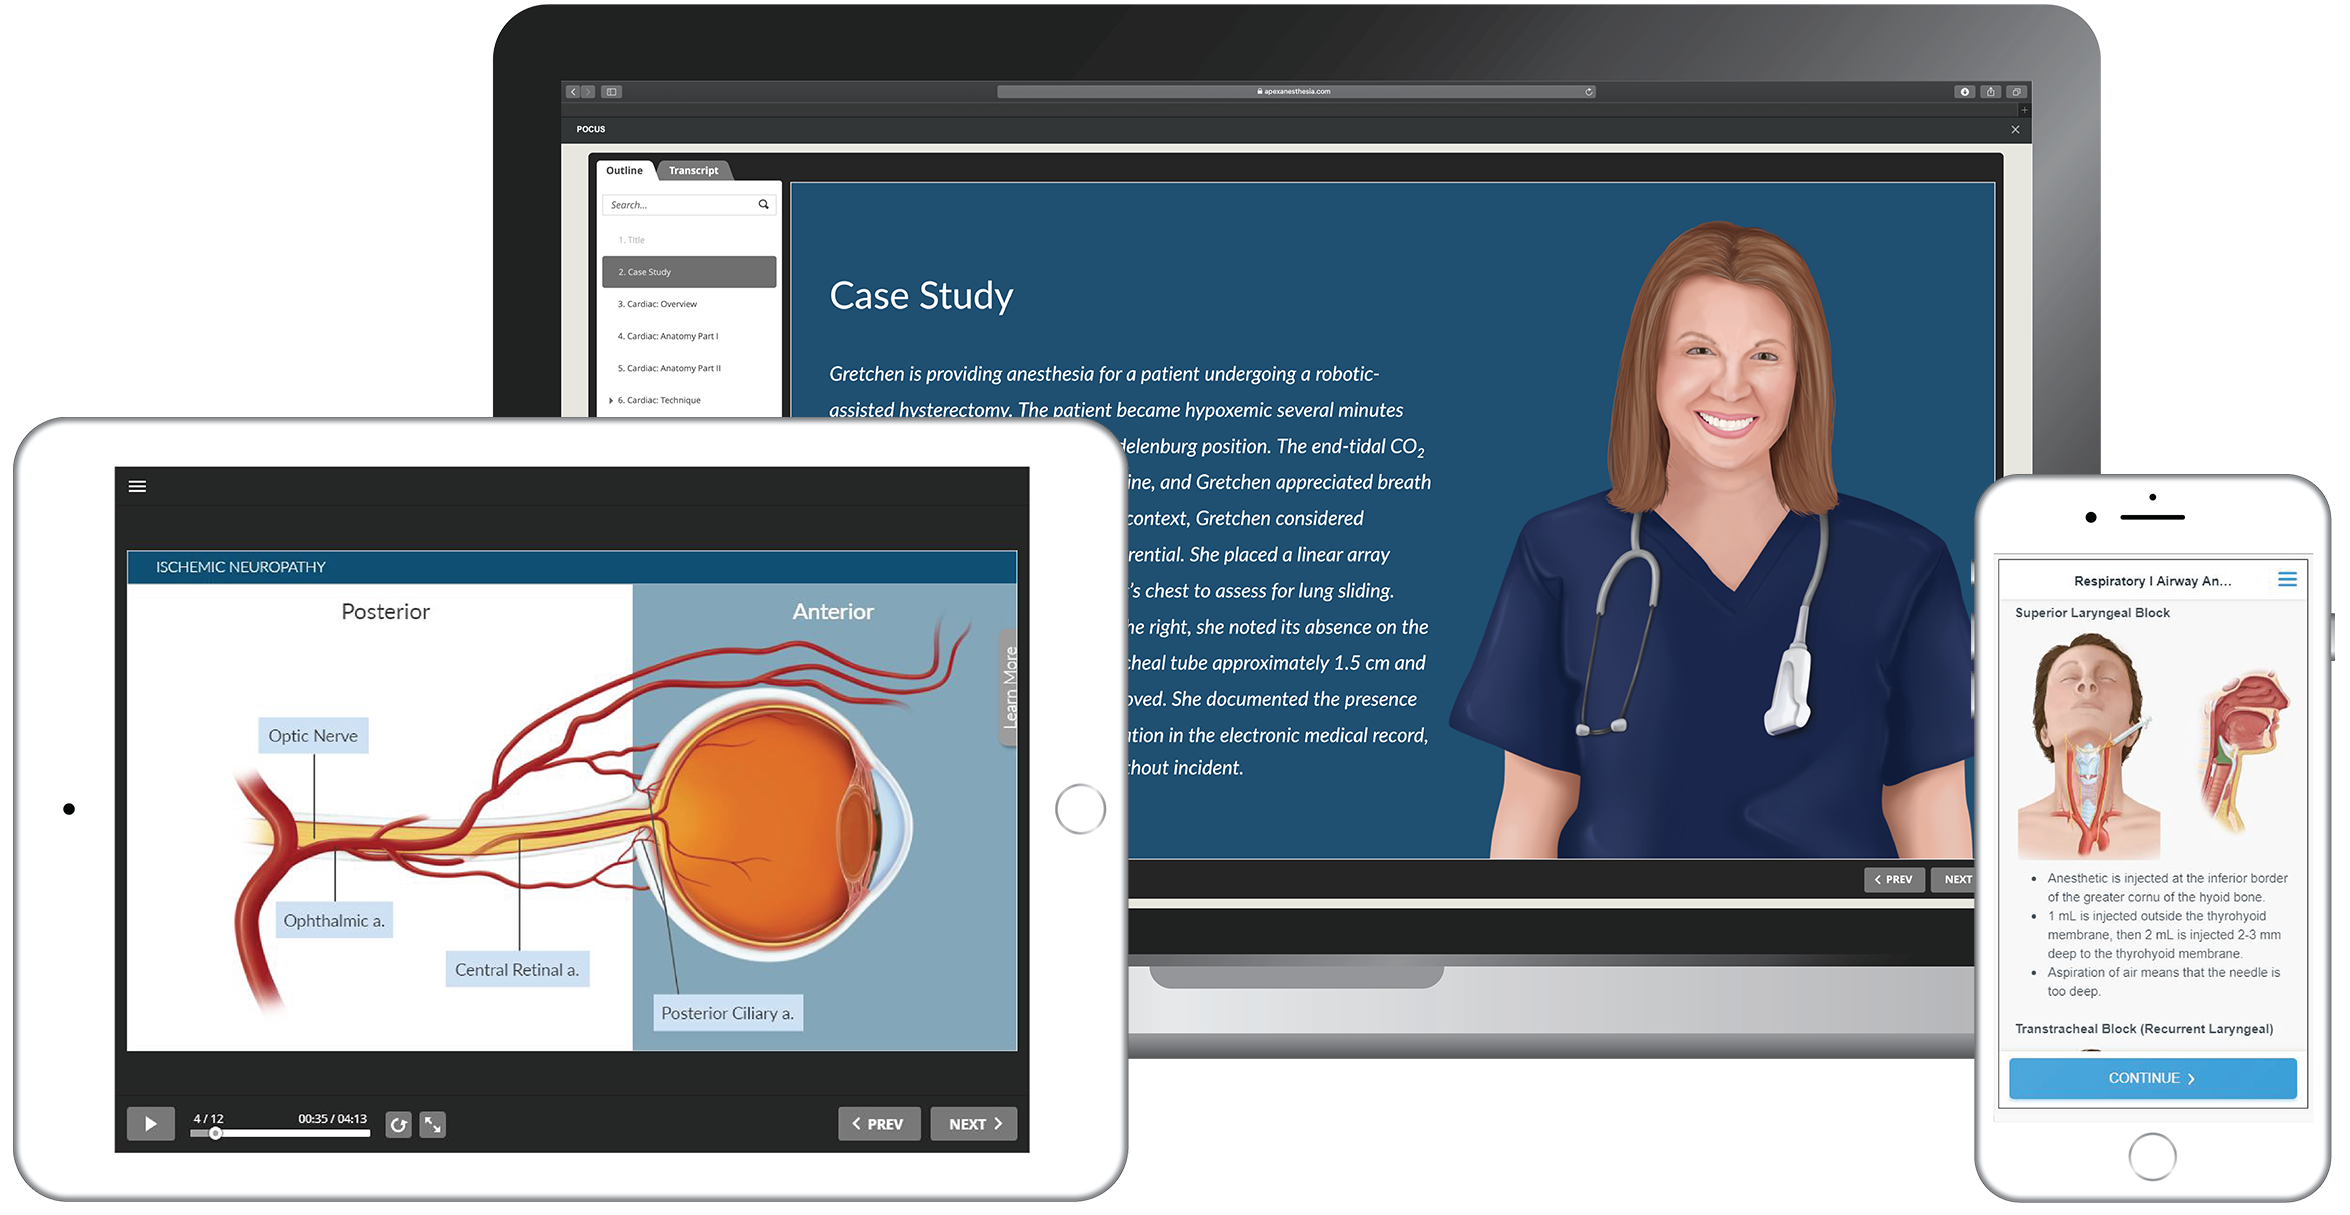 Apex Anesthesia allows CRNAs and students to learn the CPC Core Modules in several mediums including by video, streaming audio and printable PDFs. 